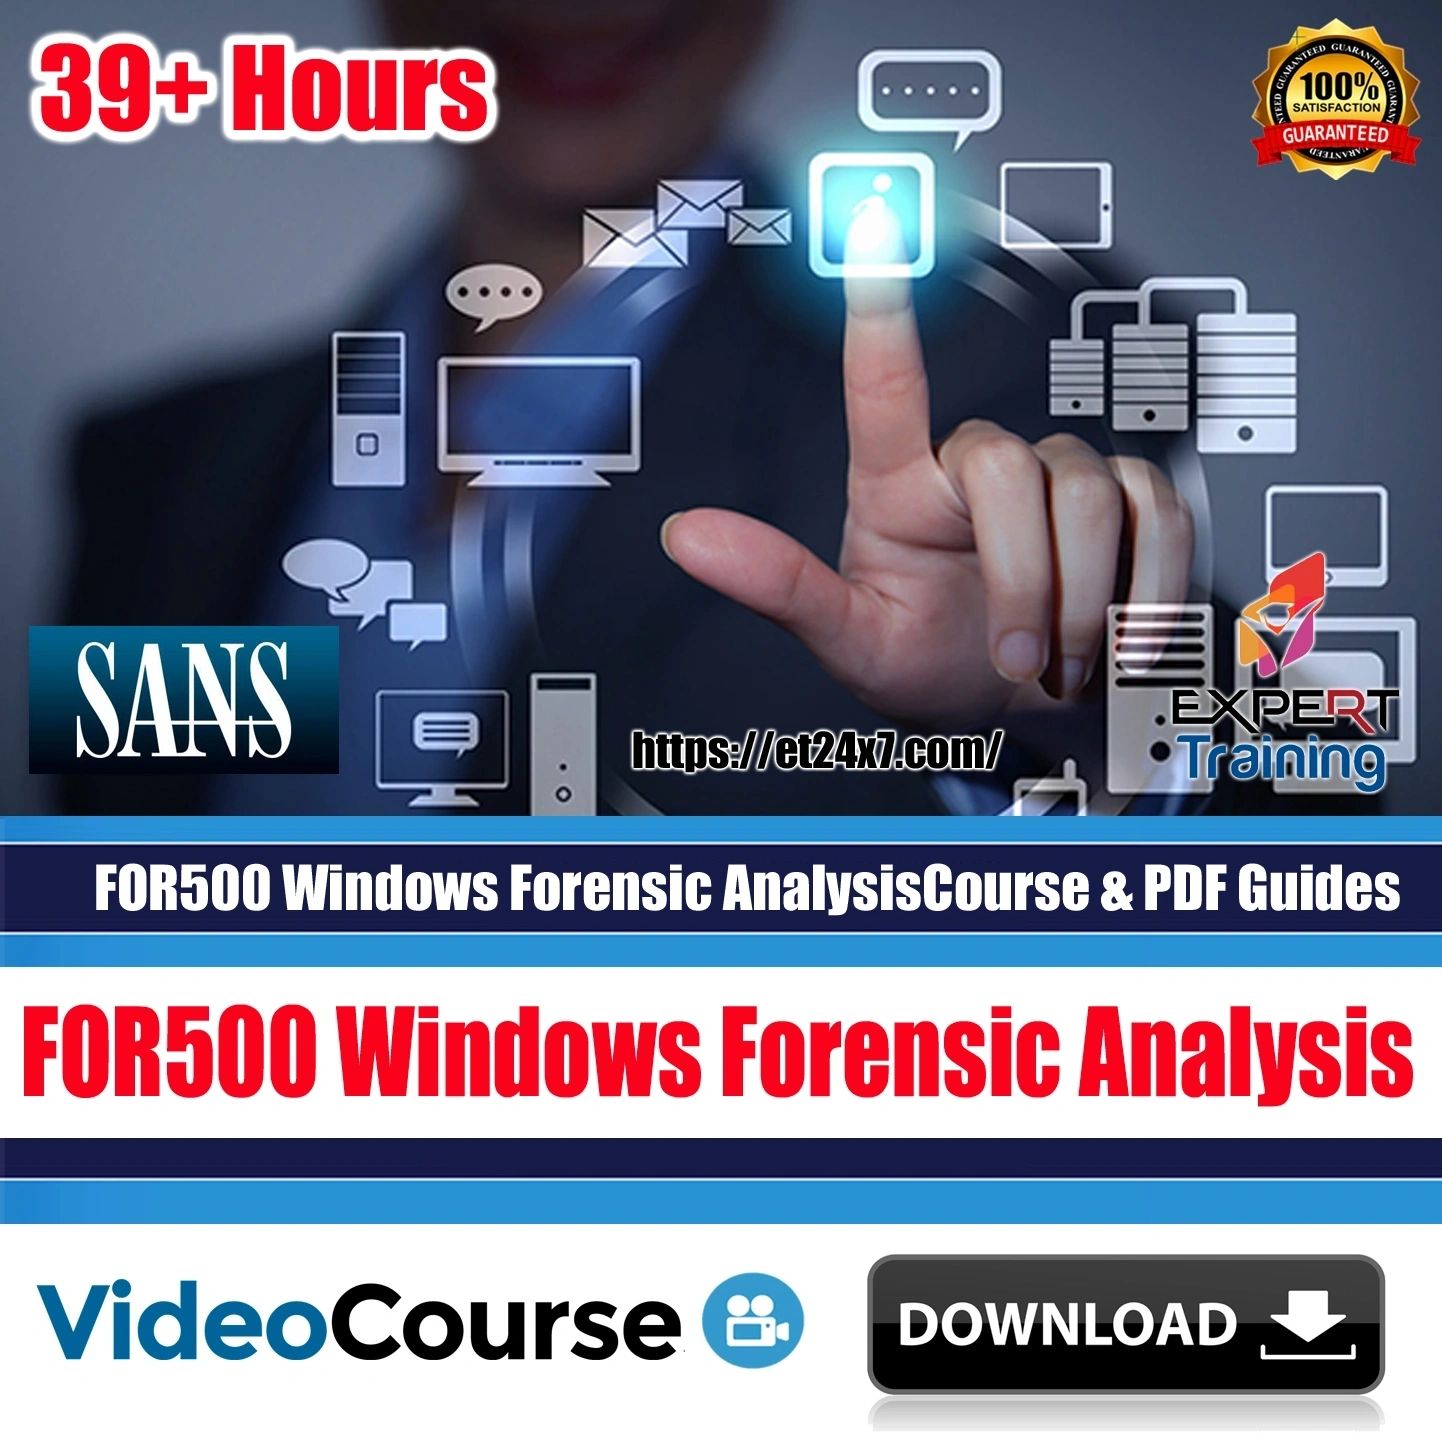 FOR500 Windows Forensic Analysis Course & PDF Guides (VOD, USB, PDF)